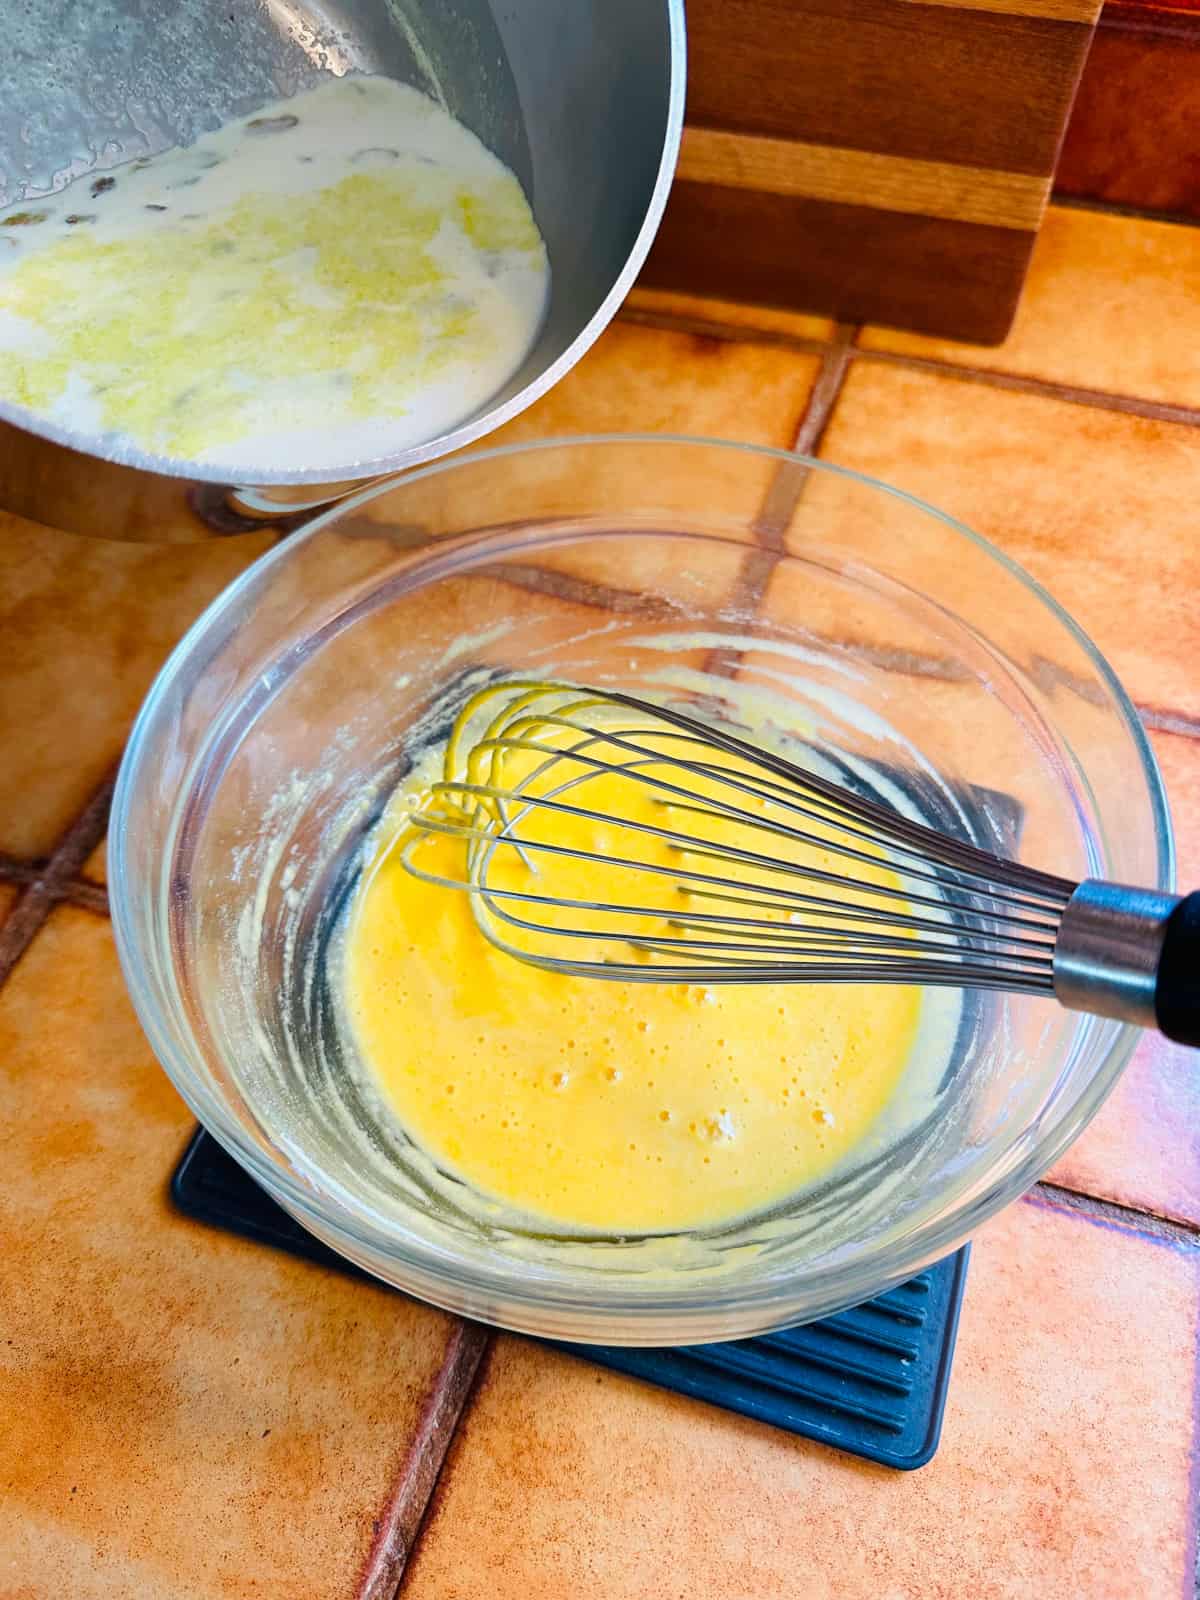 White chocolate mixture being poured from a steel saucepan into a glass bowl with yolk mixture and a whisk.